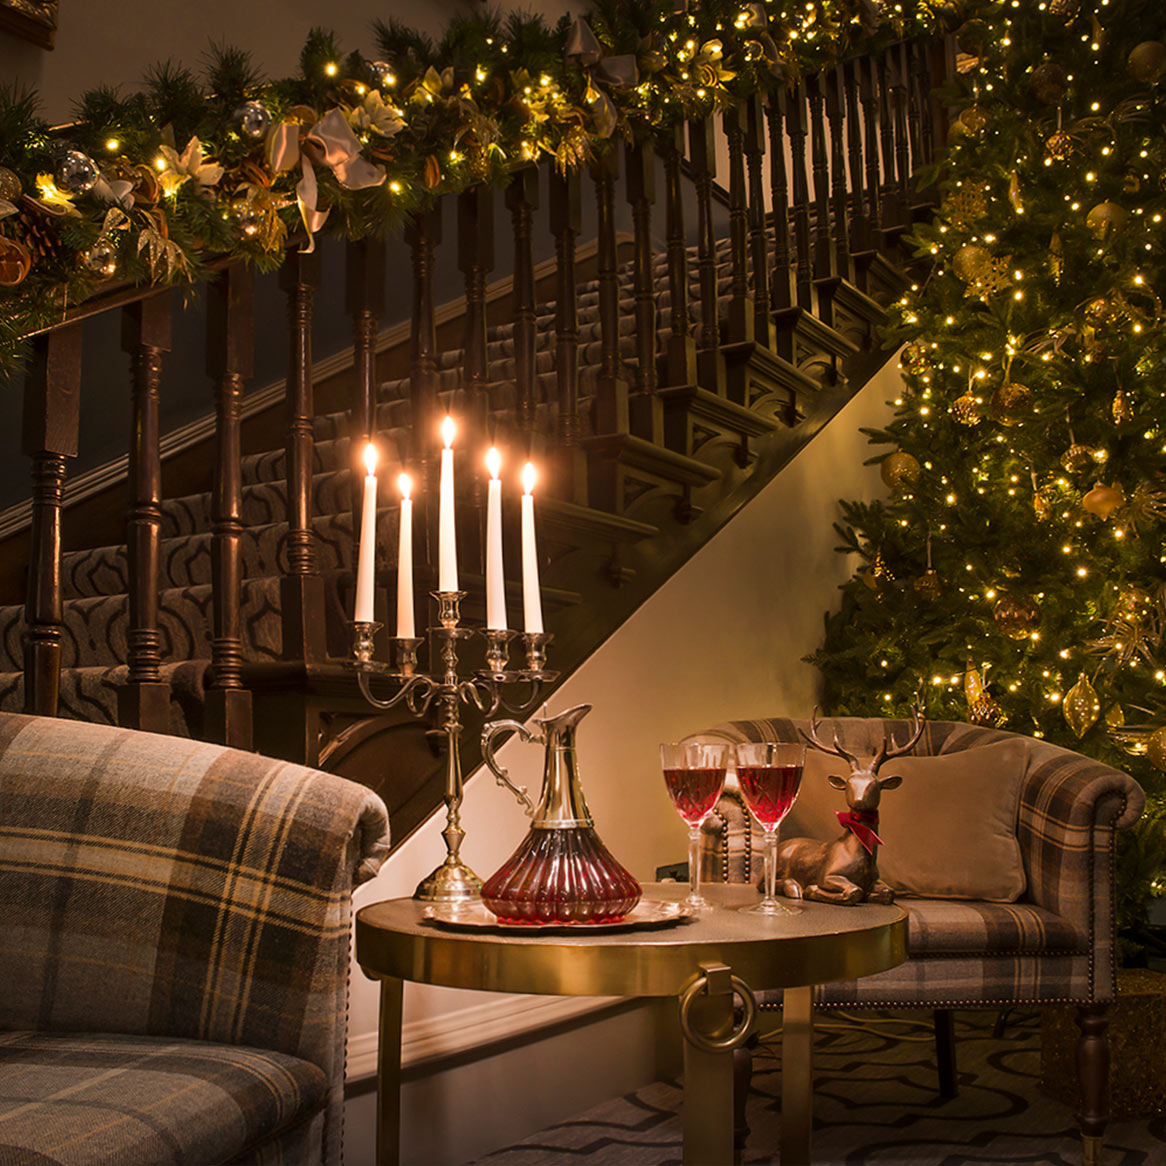 Relax and feel festive at Christmas